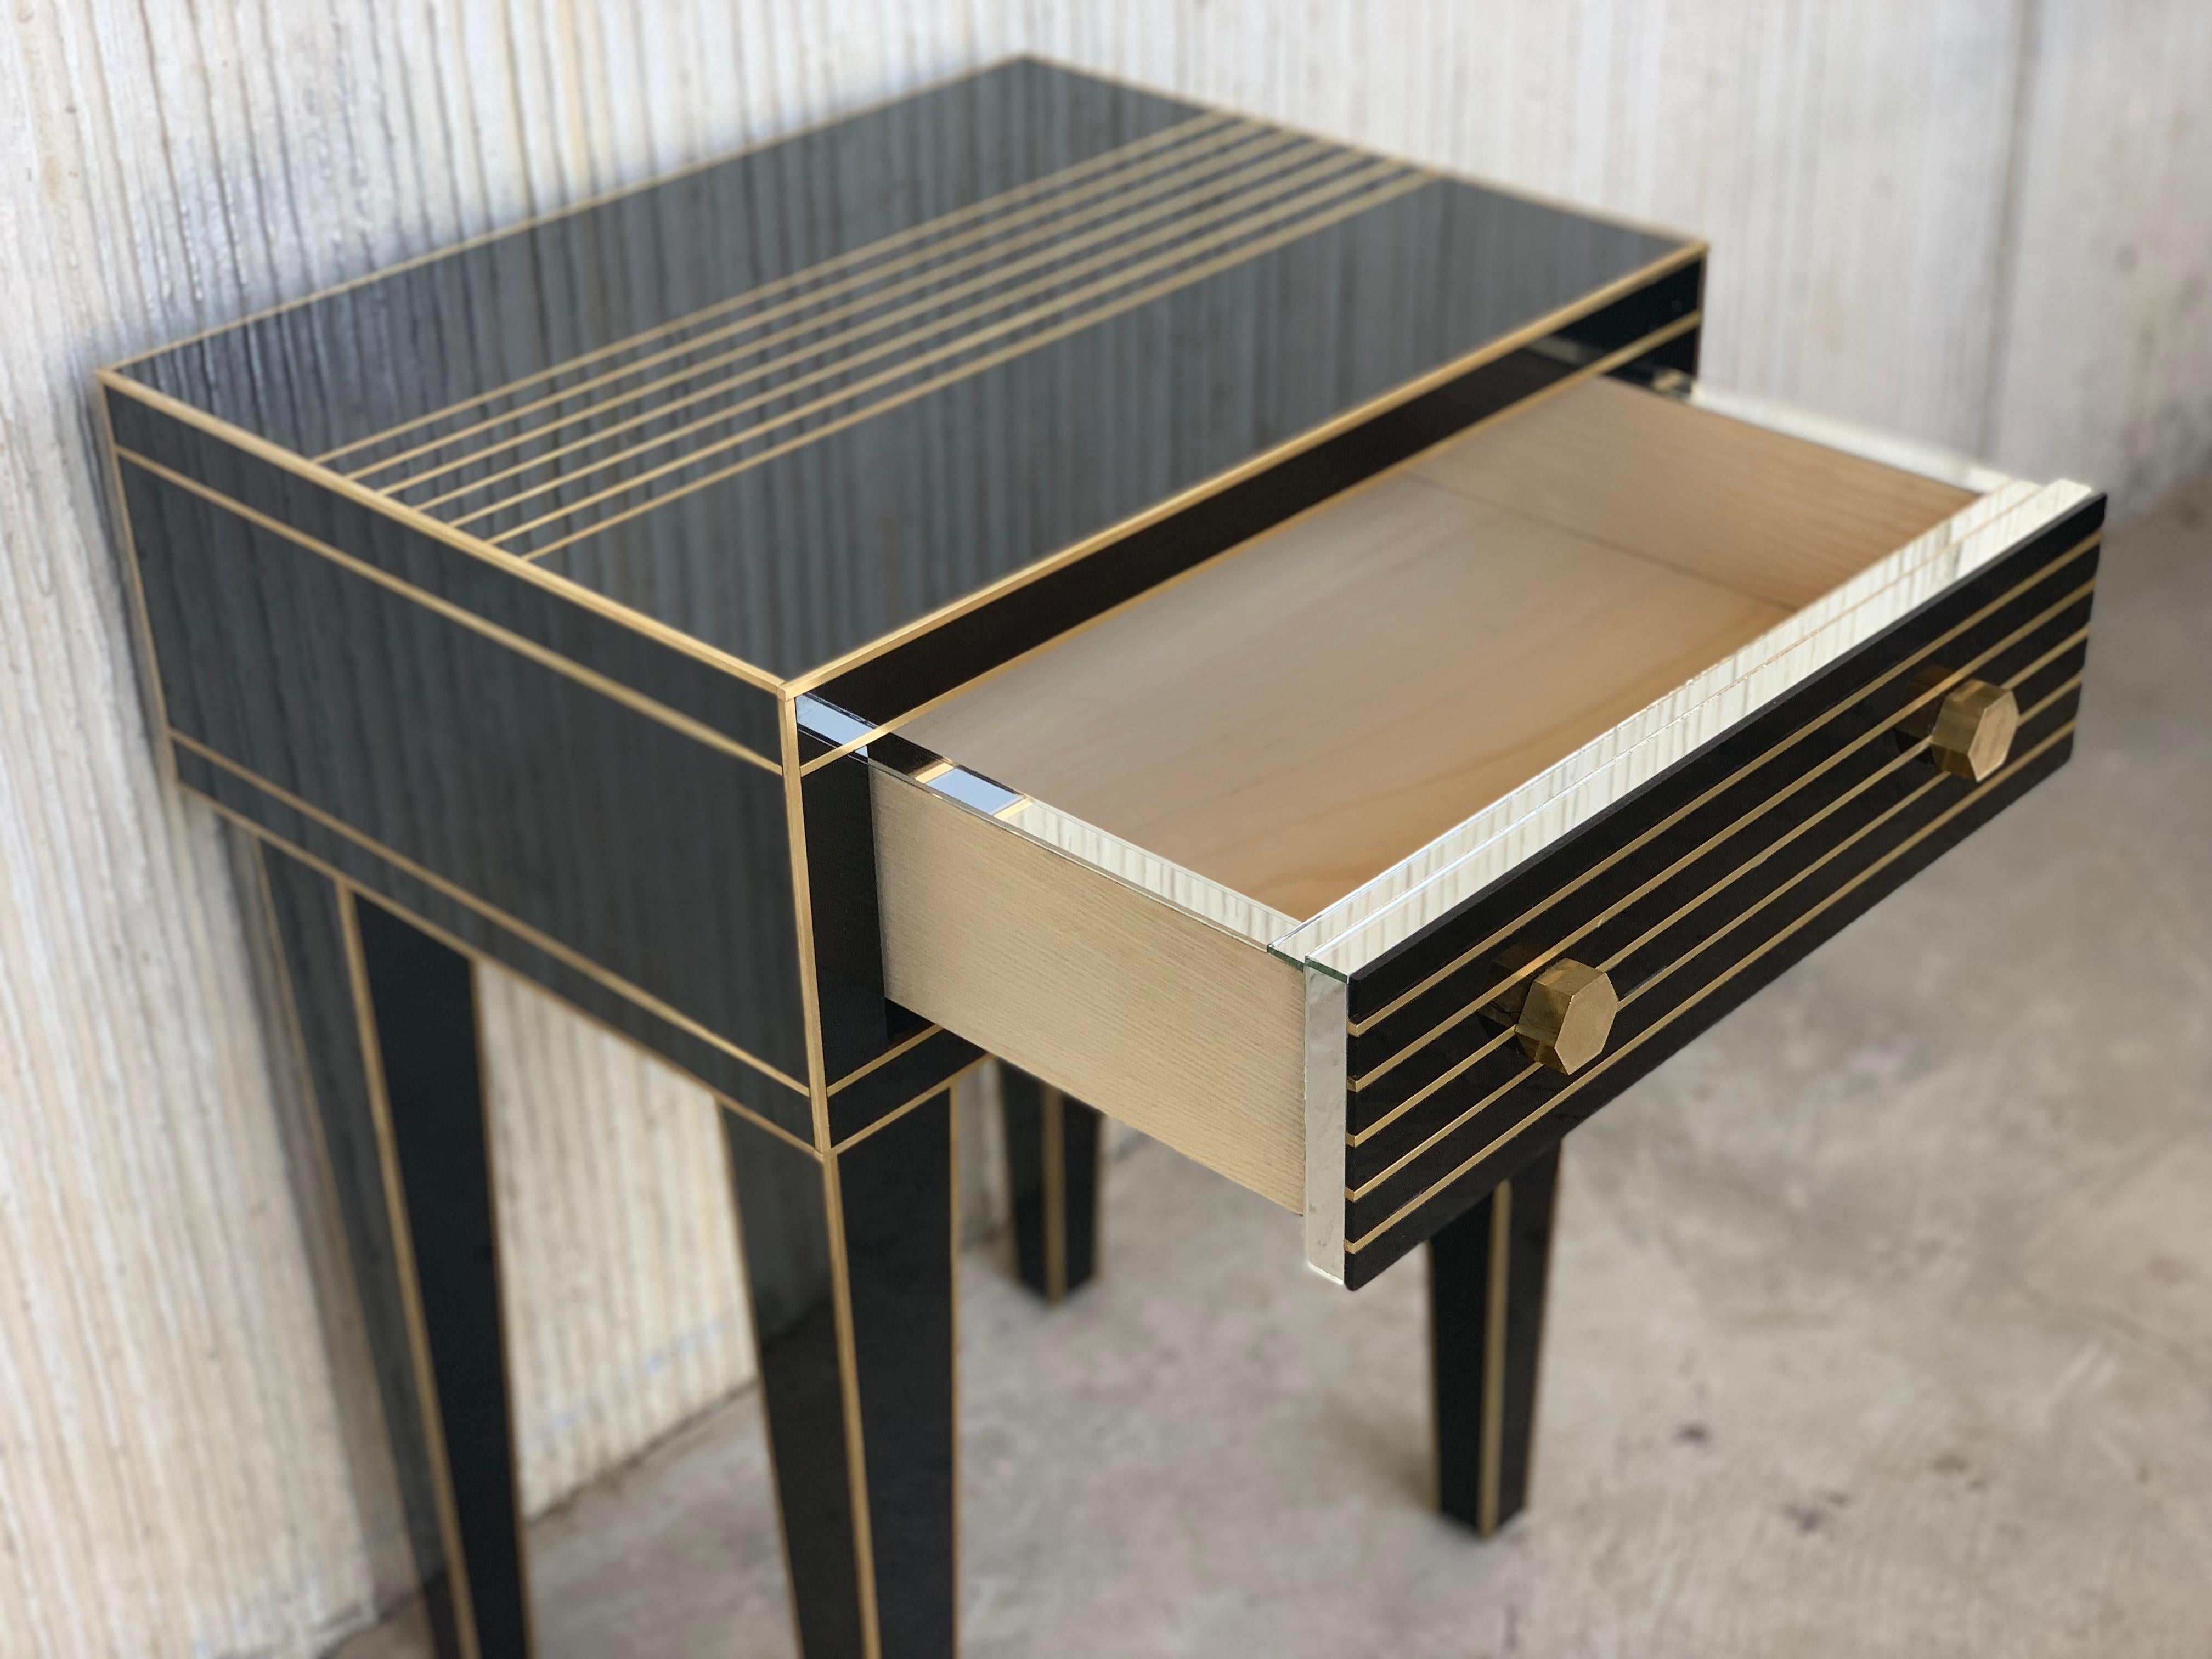 Contemporary New Mirrored Nightstand in Black Mirror and Chrome with One Drawer